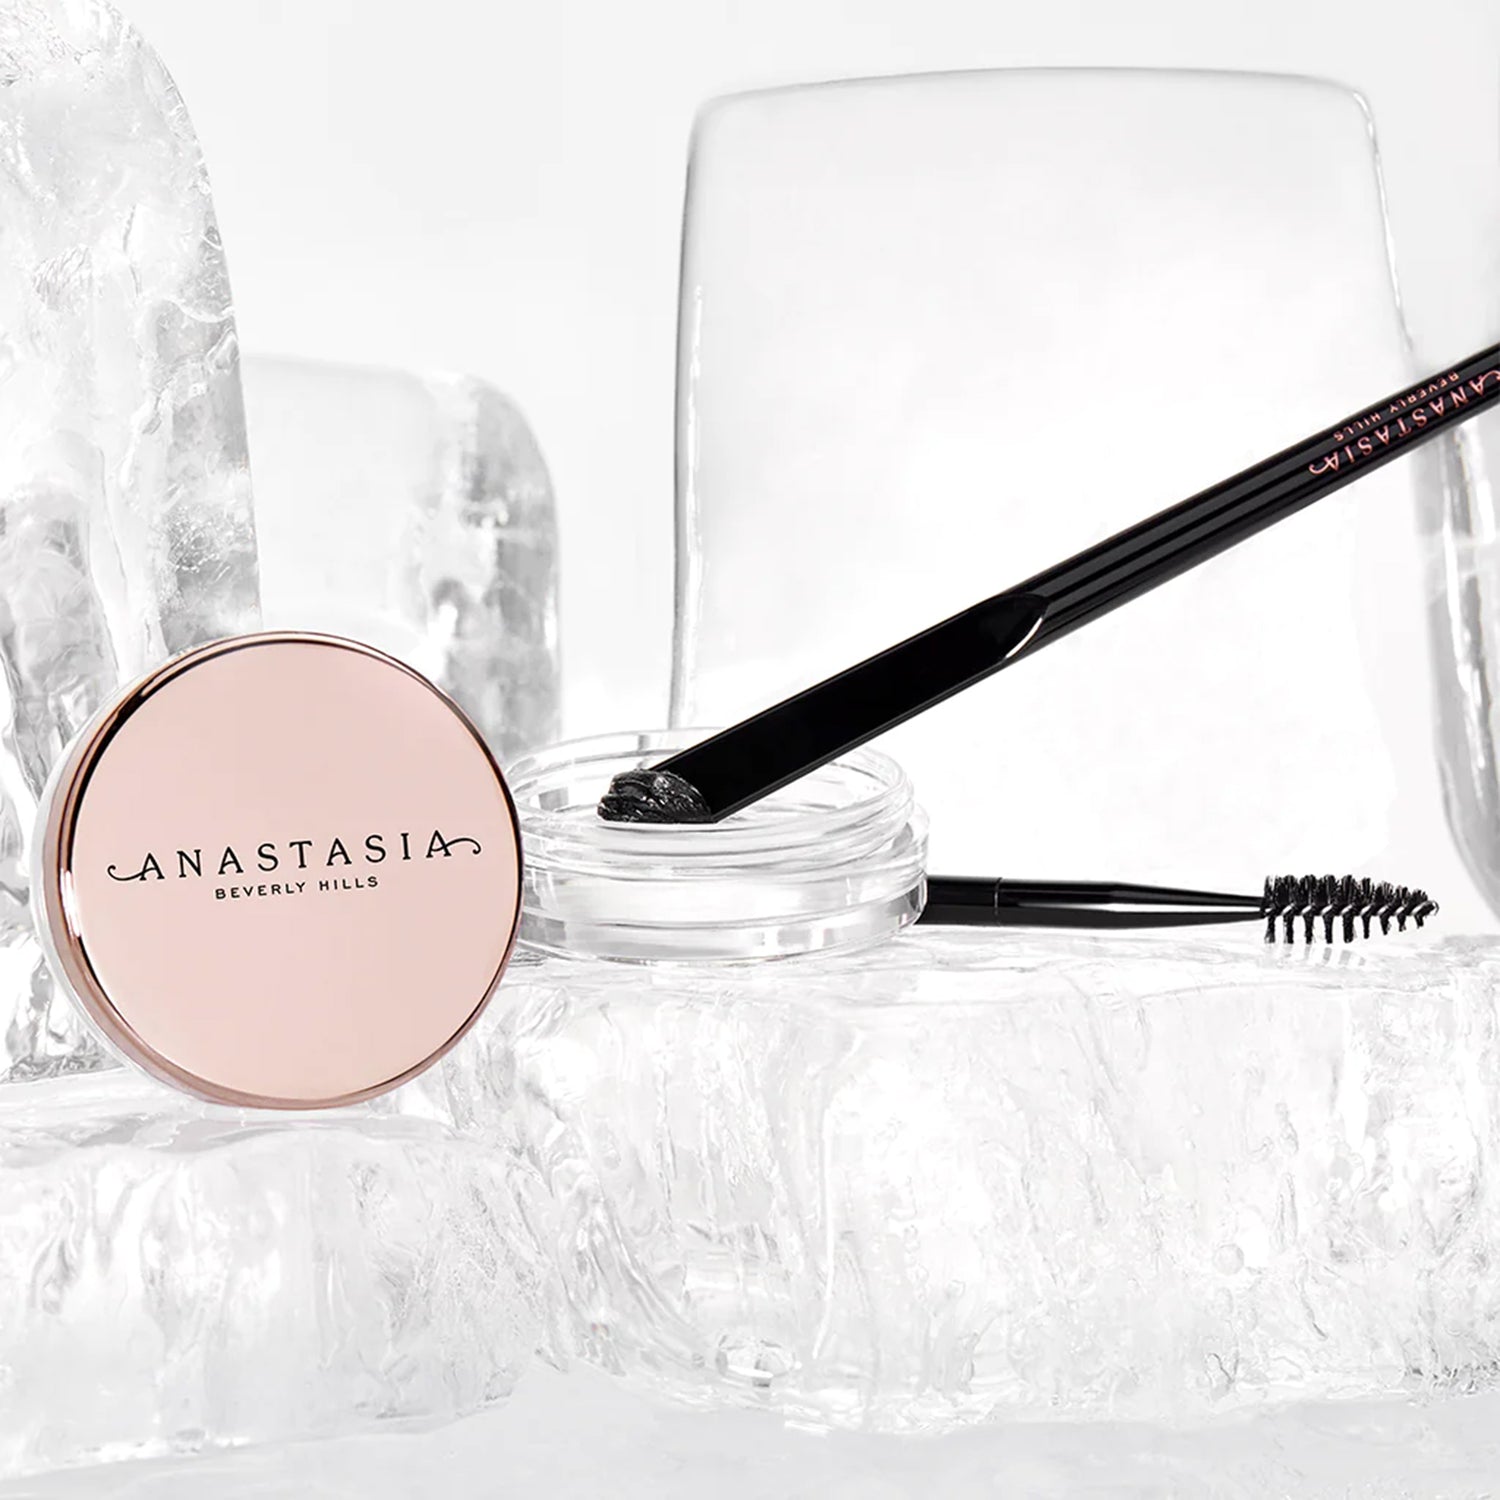 Brow Freeze Dual Ended Applicator